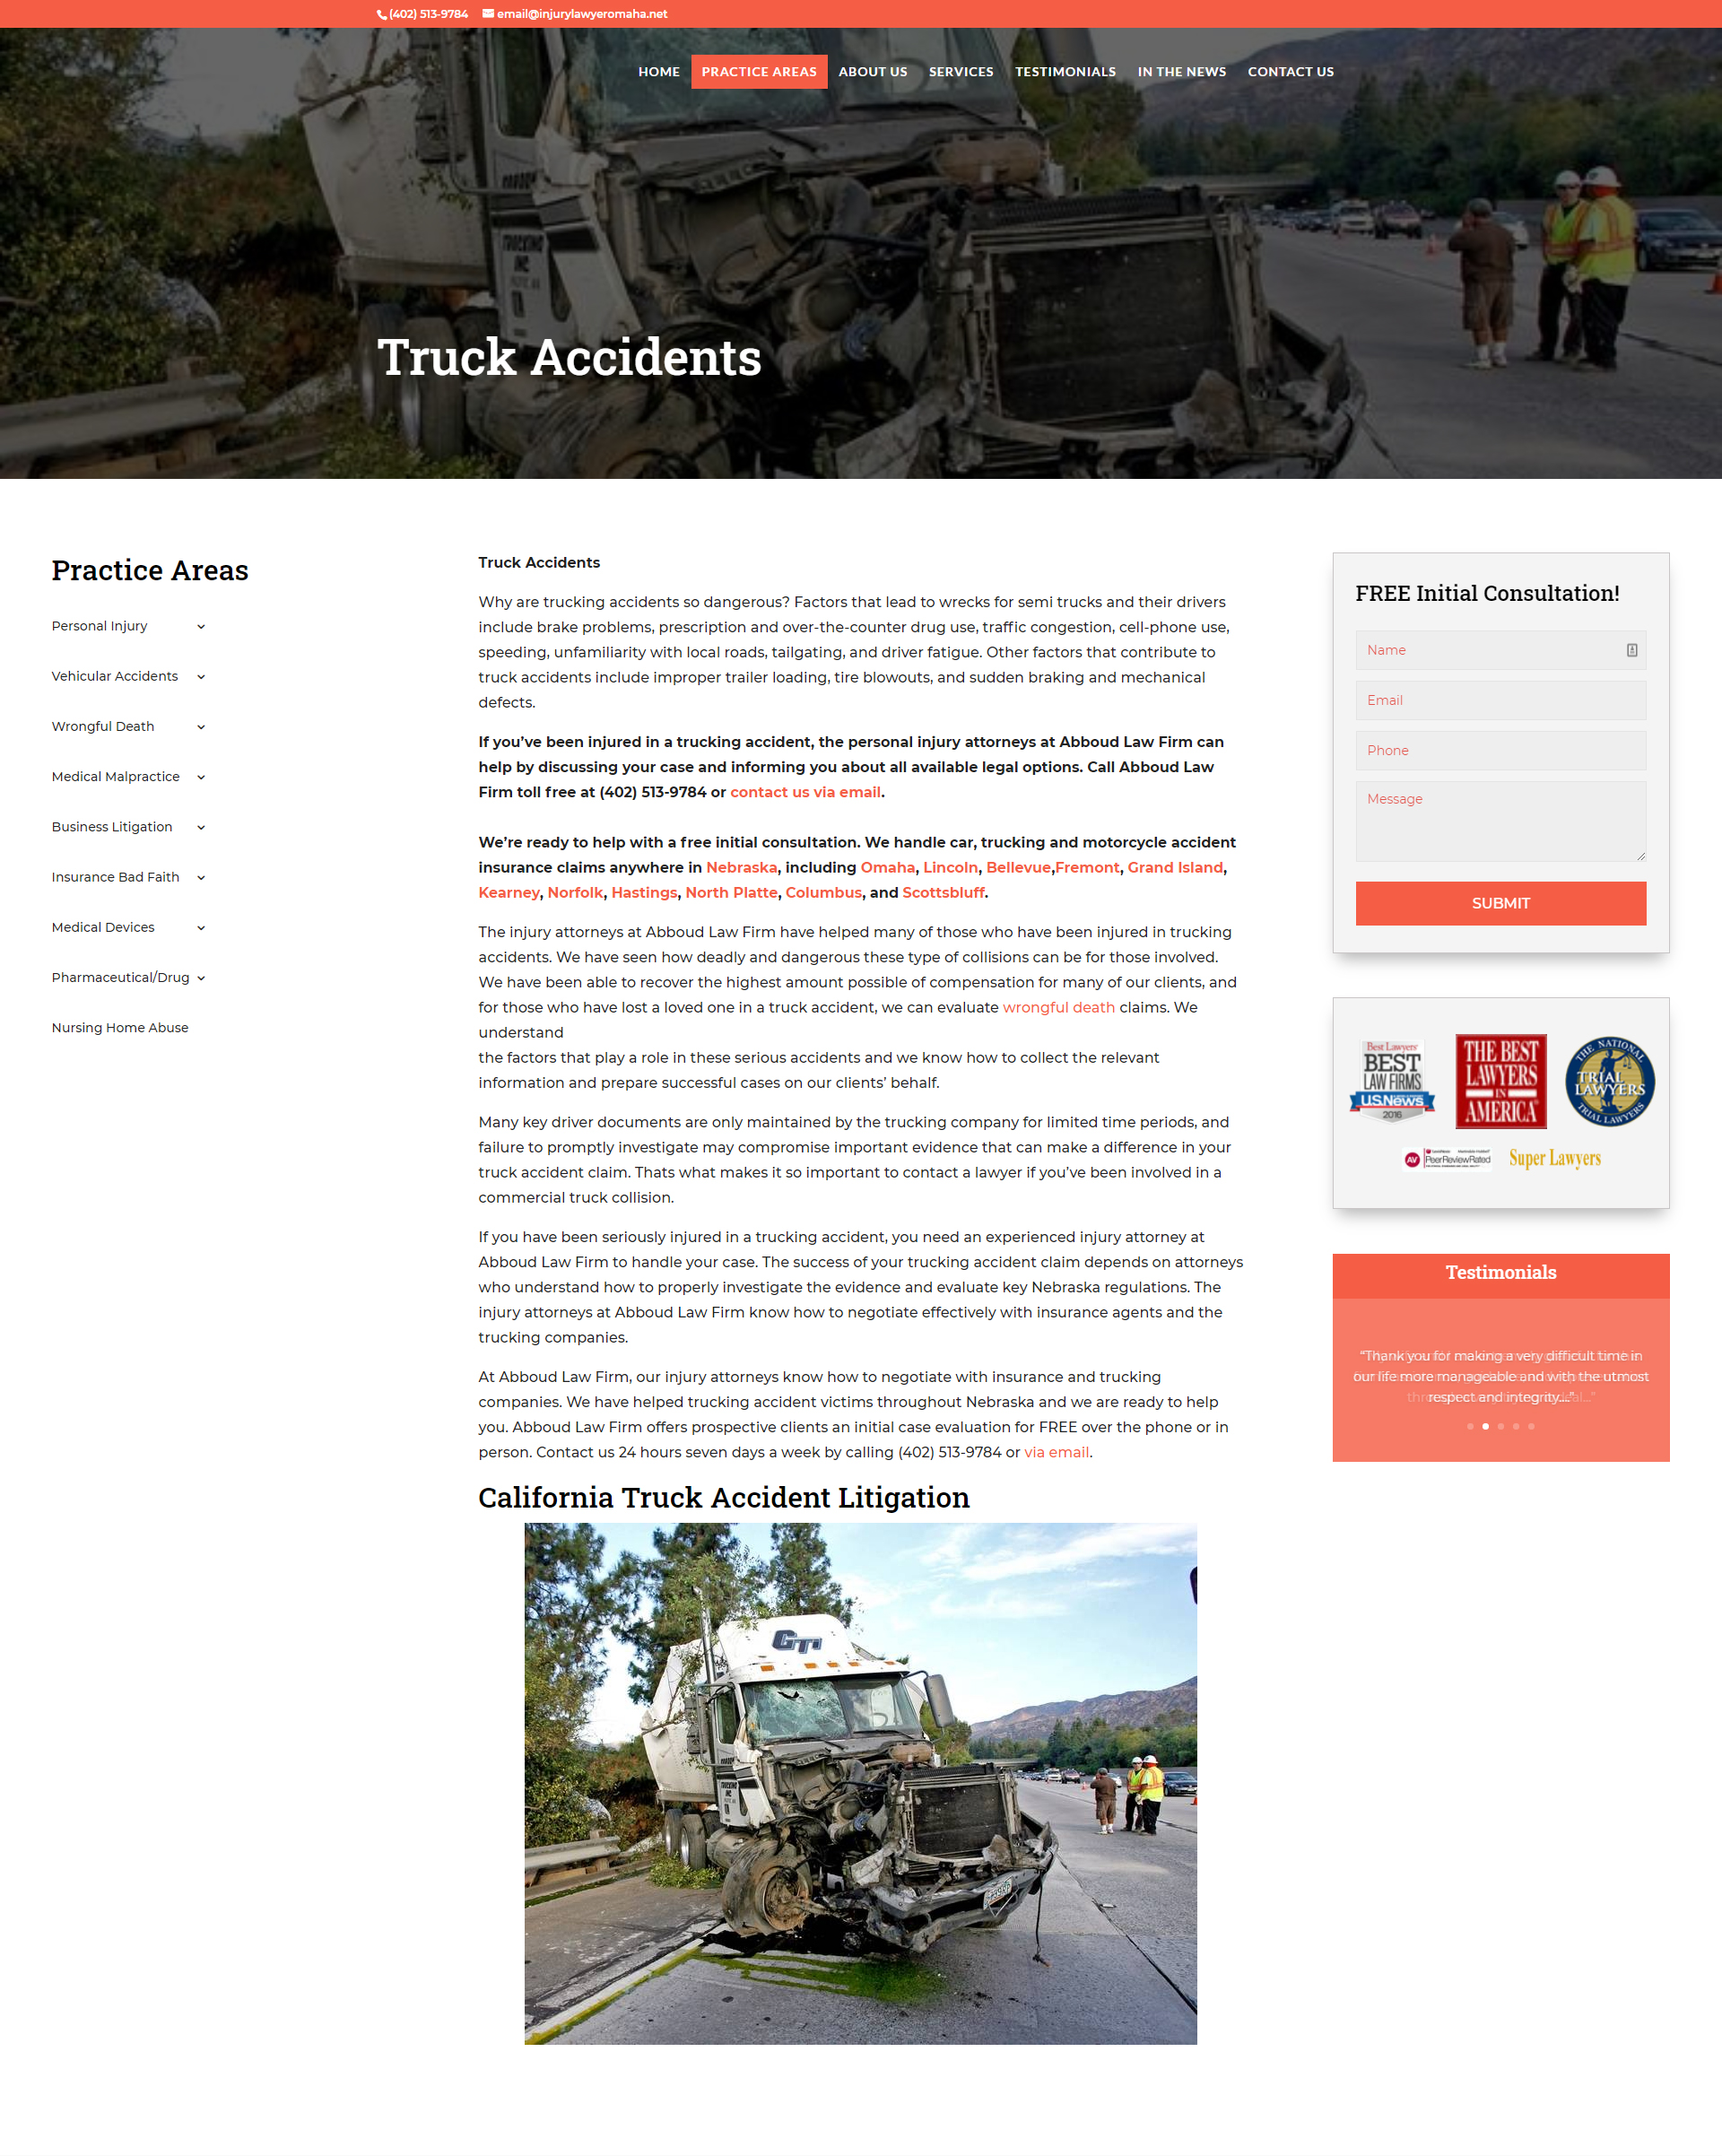 About Truck Accidents